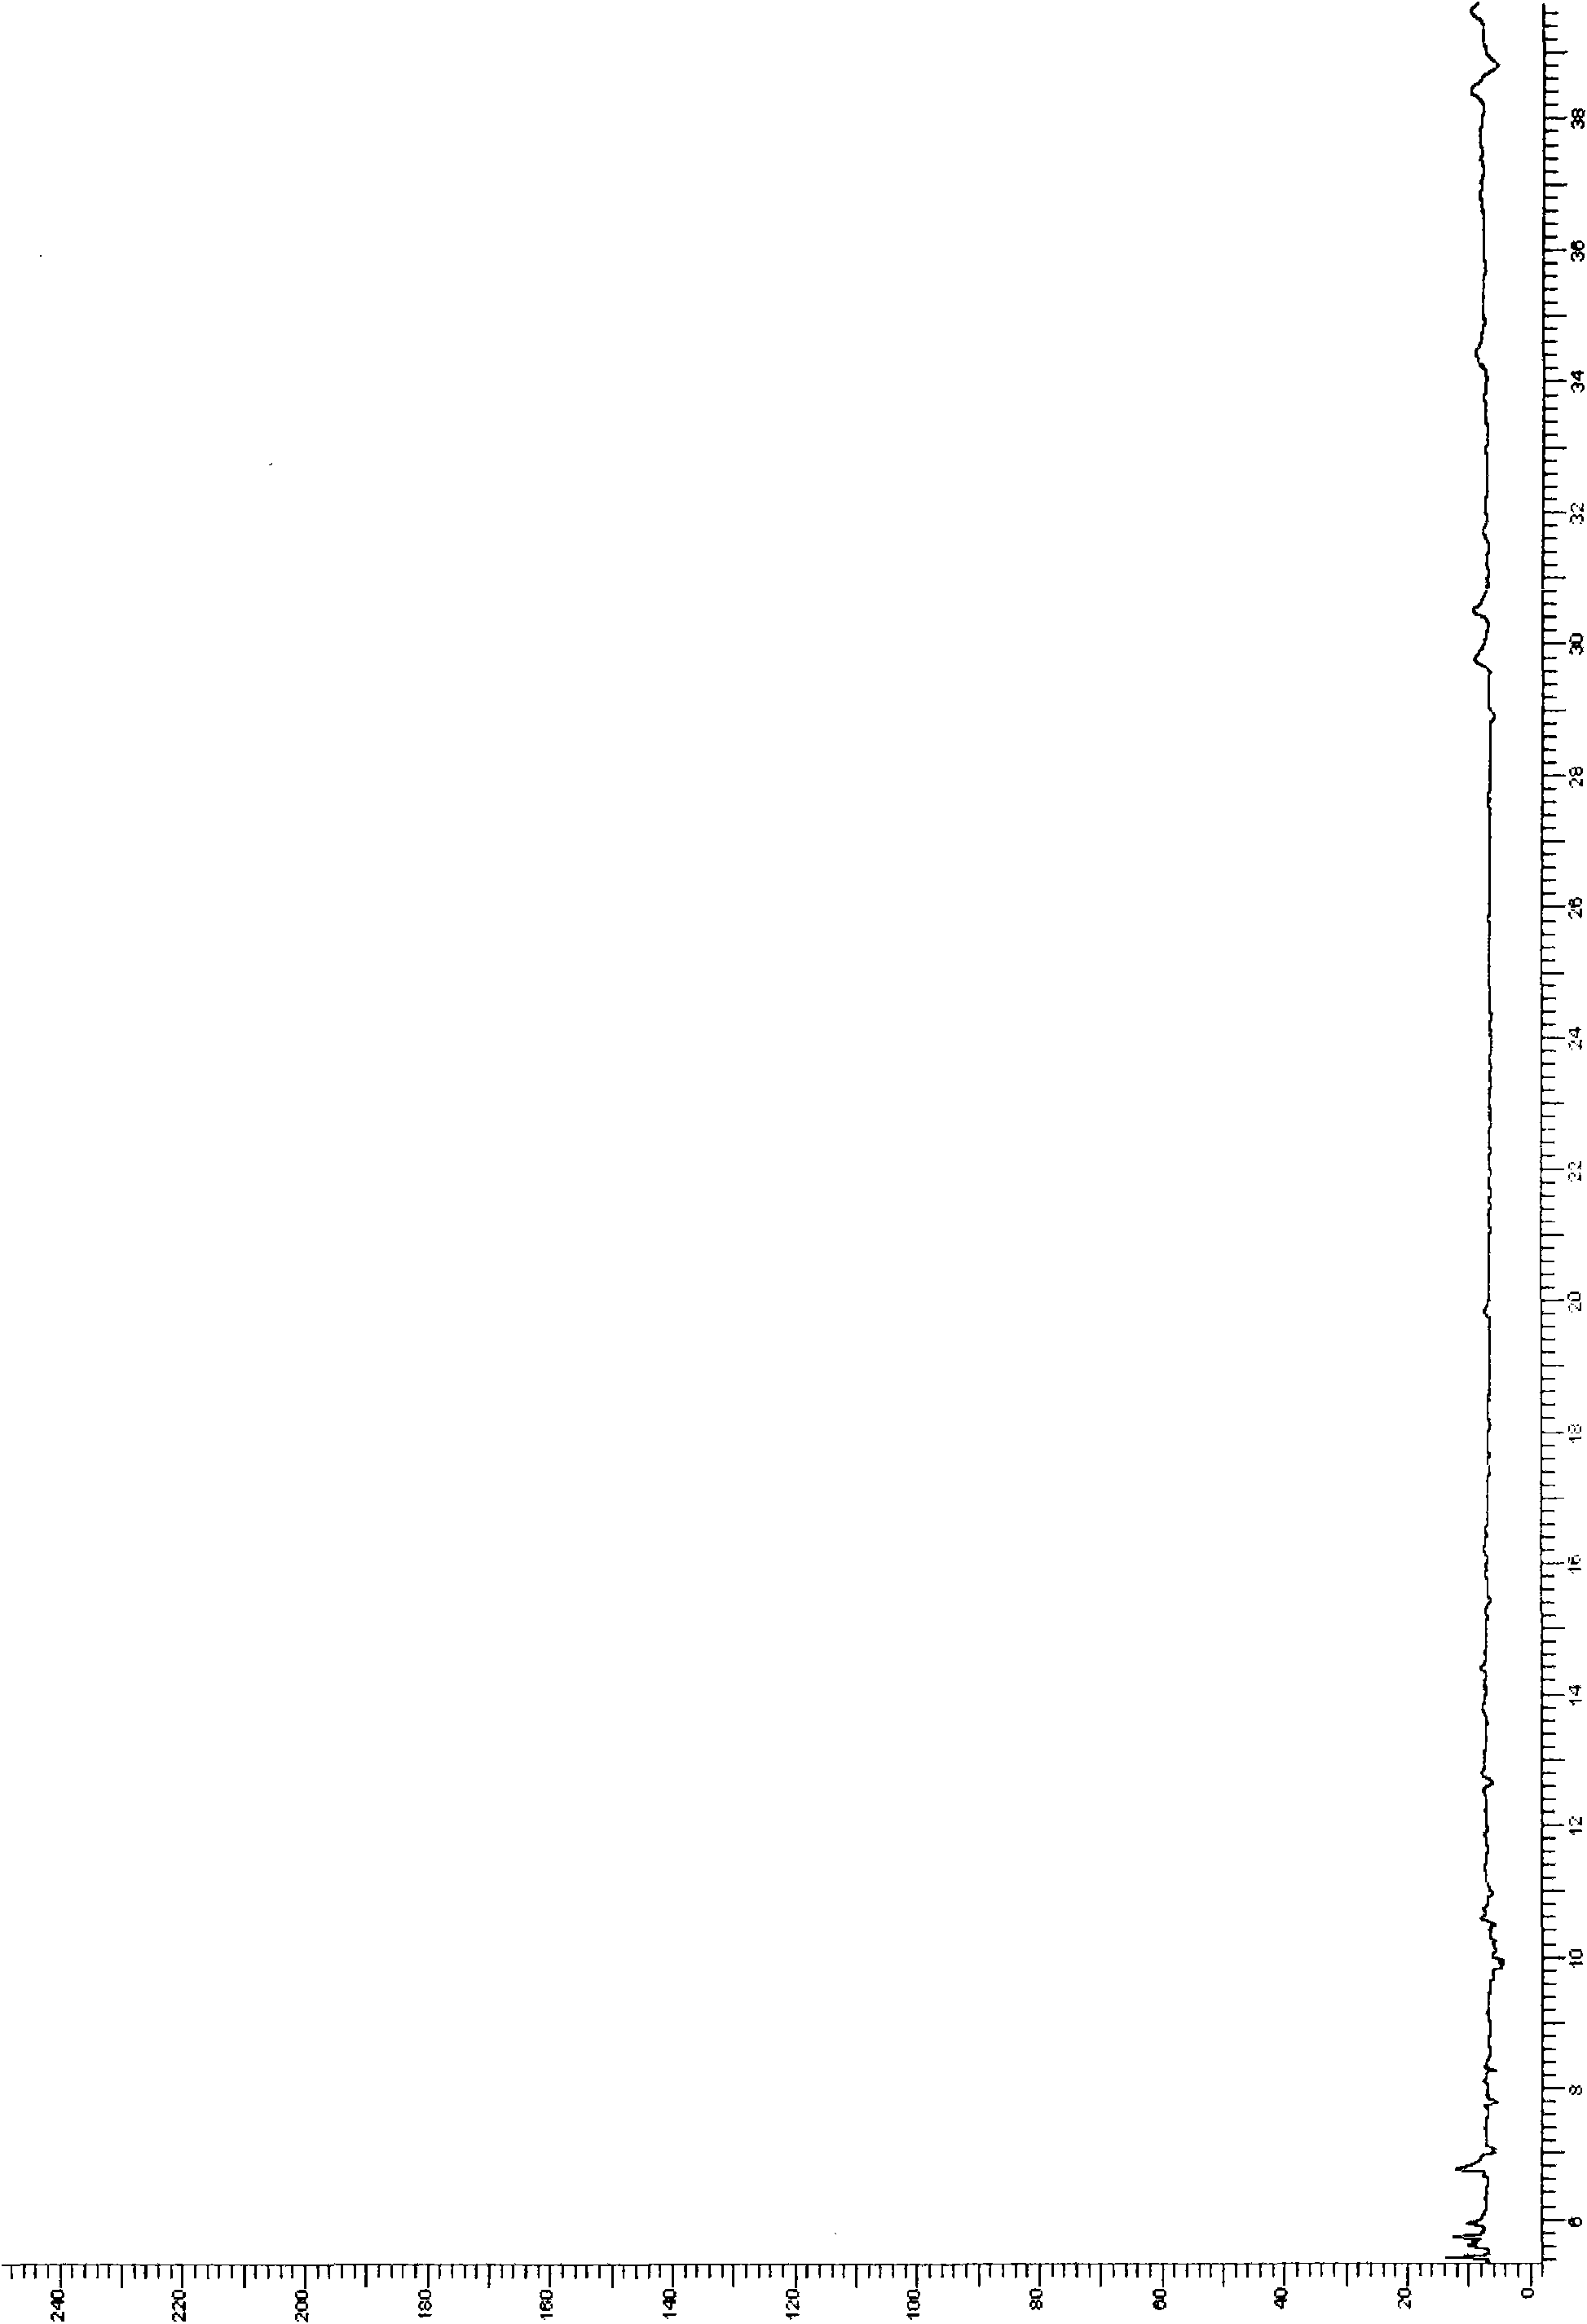 Method for simultaneously measuring multiple residues of organic chloride and pyrethroid pesticides